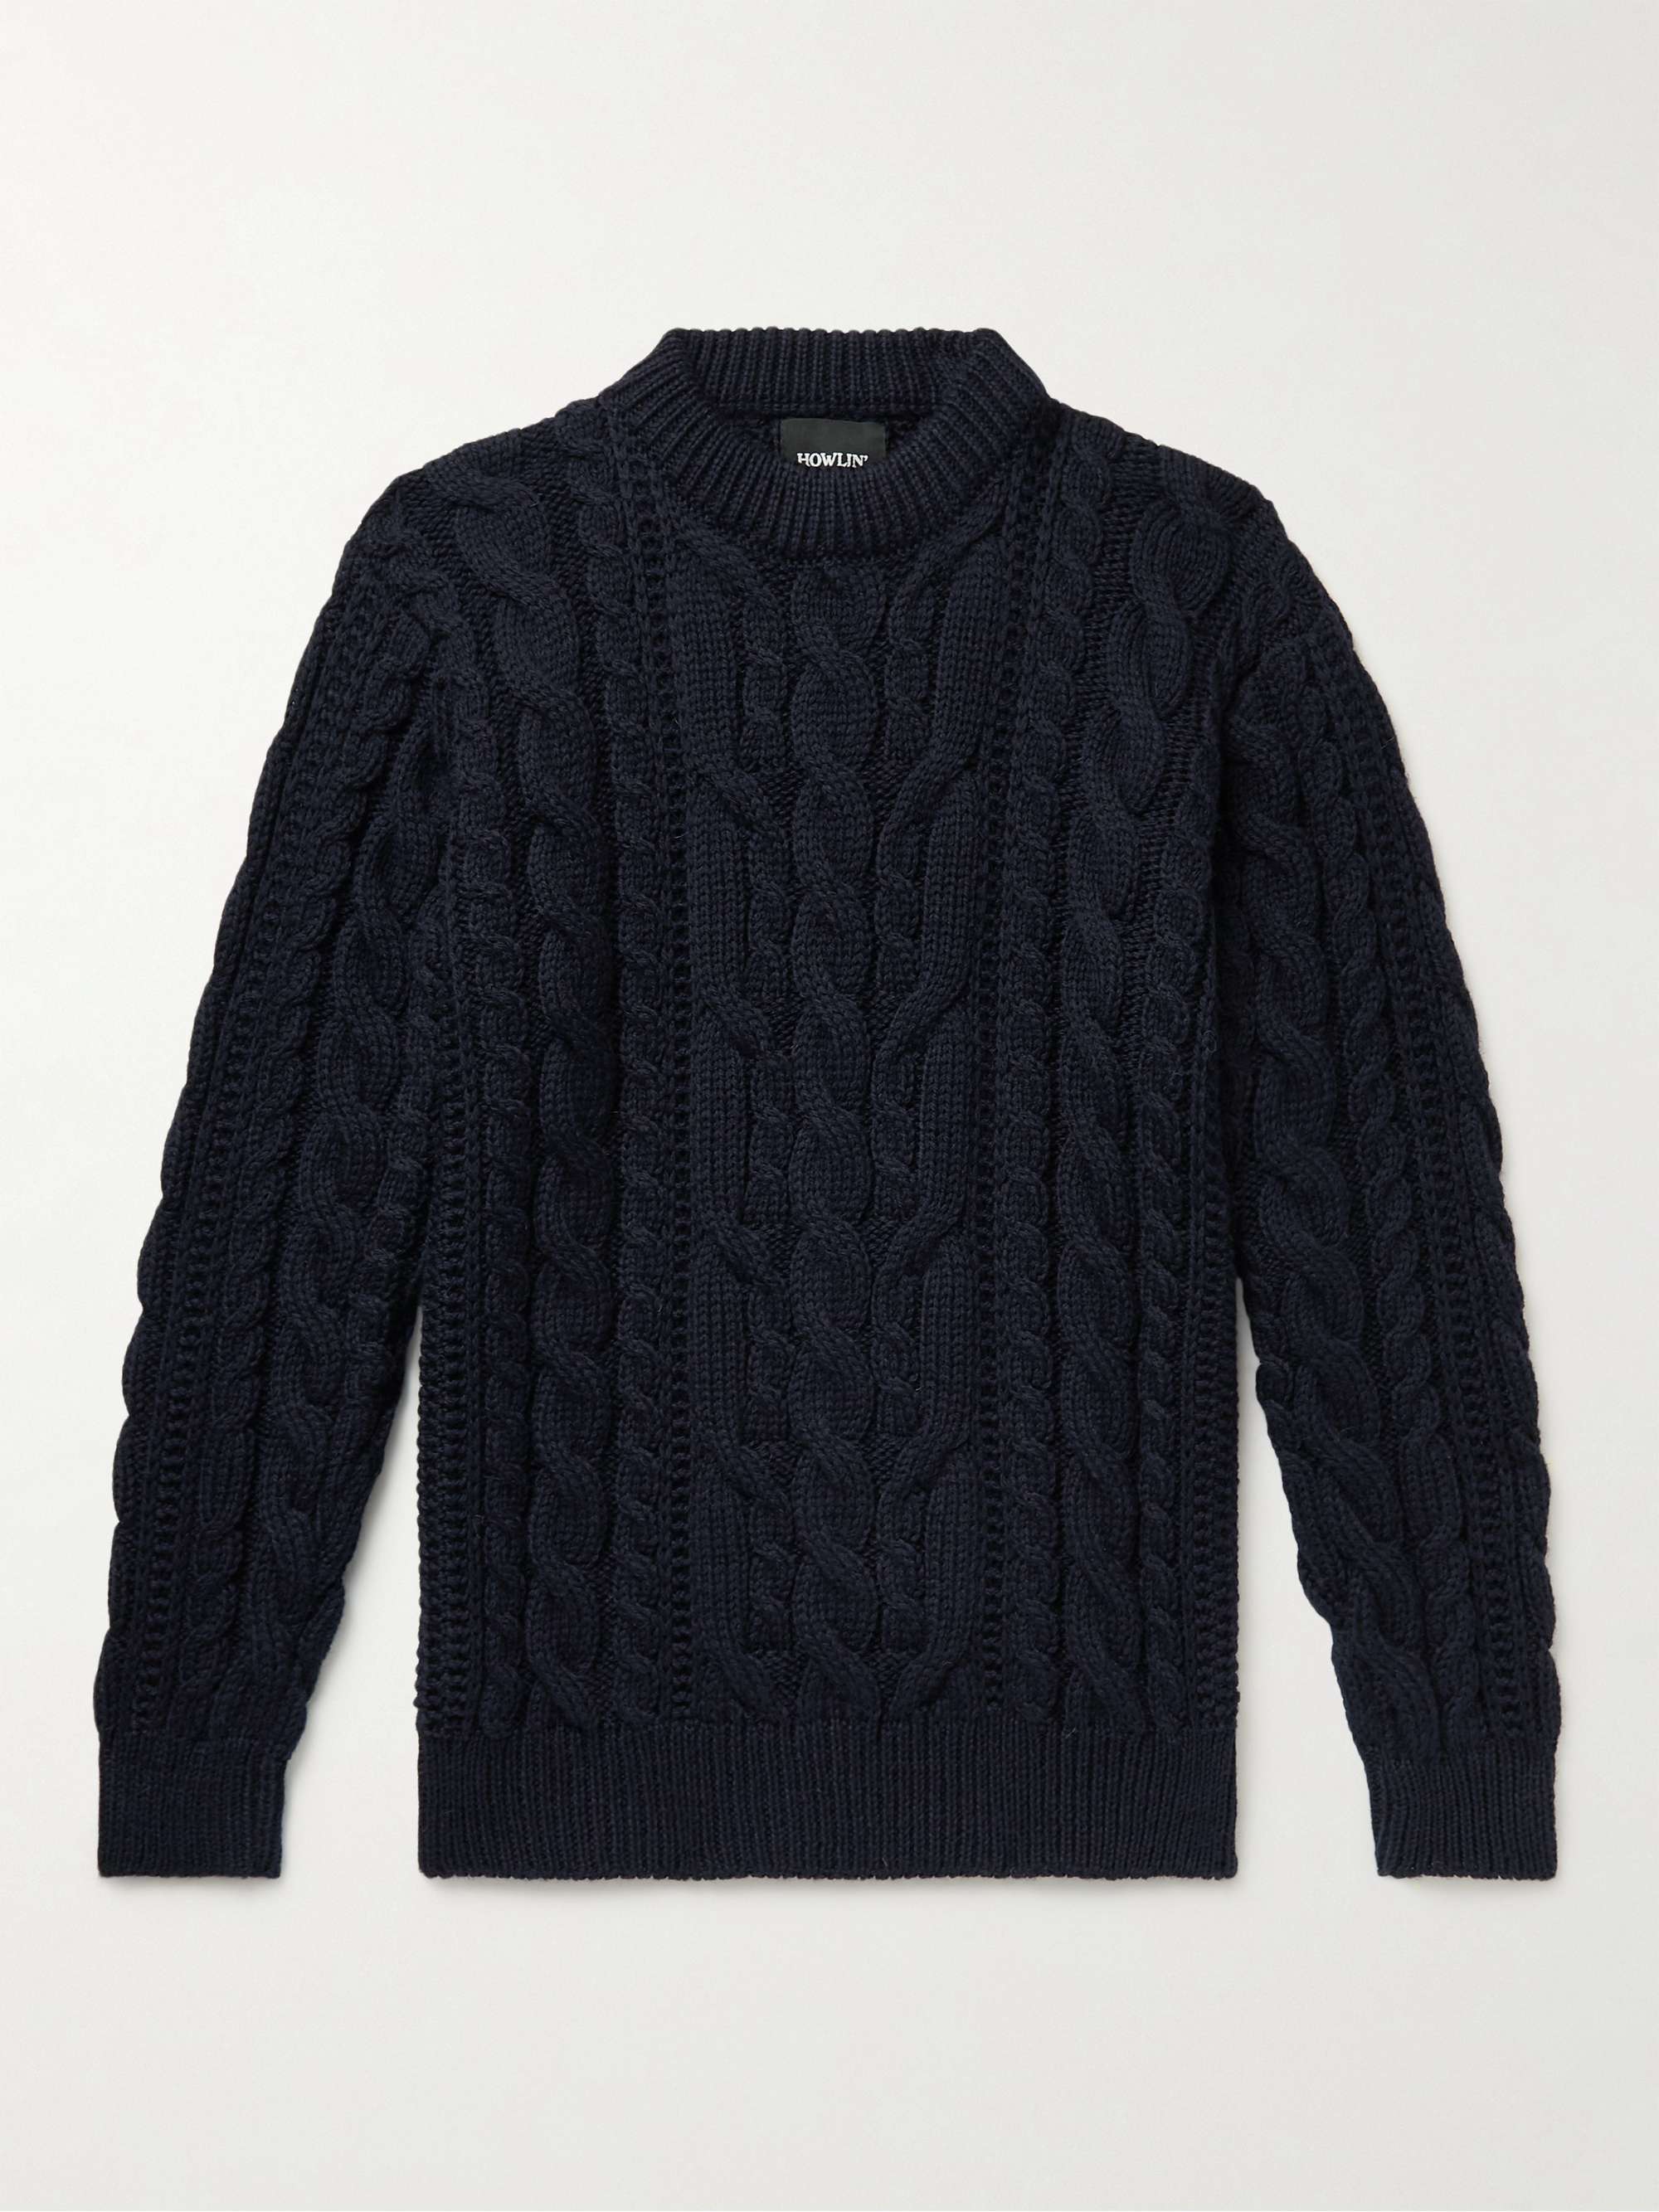 HOWLIN' Forbidden Dreams Cable-Knit Wool Sweater for Men | MR PORTER